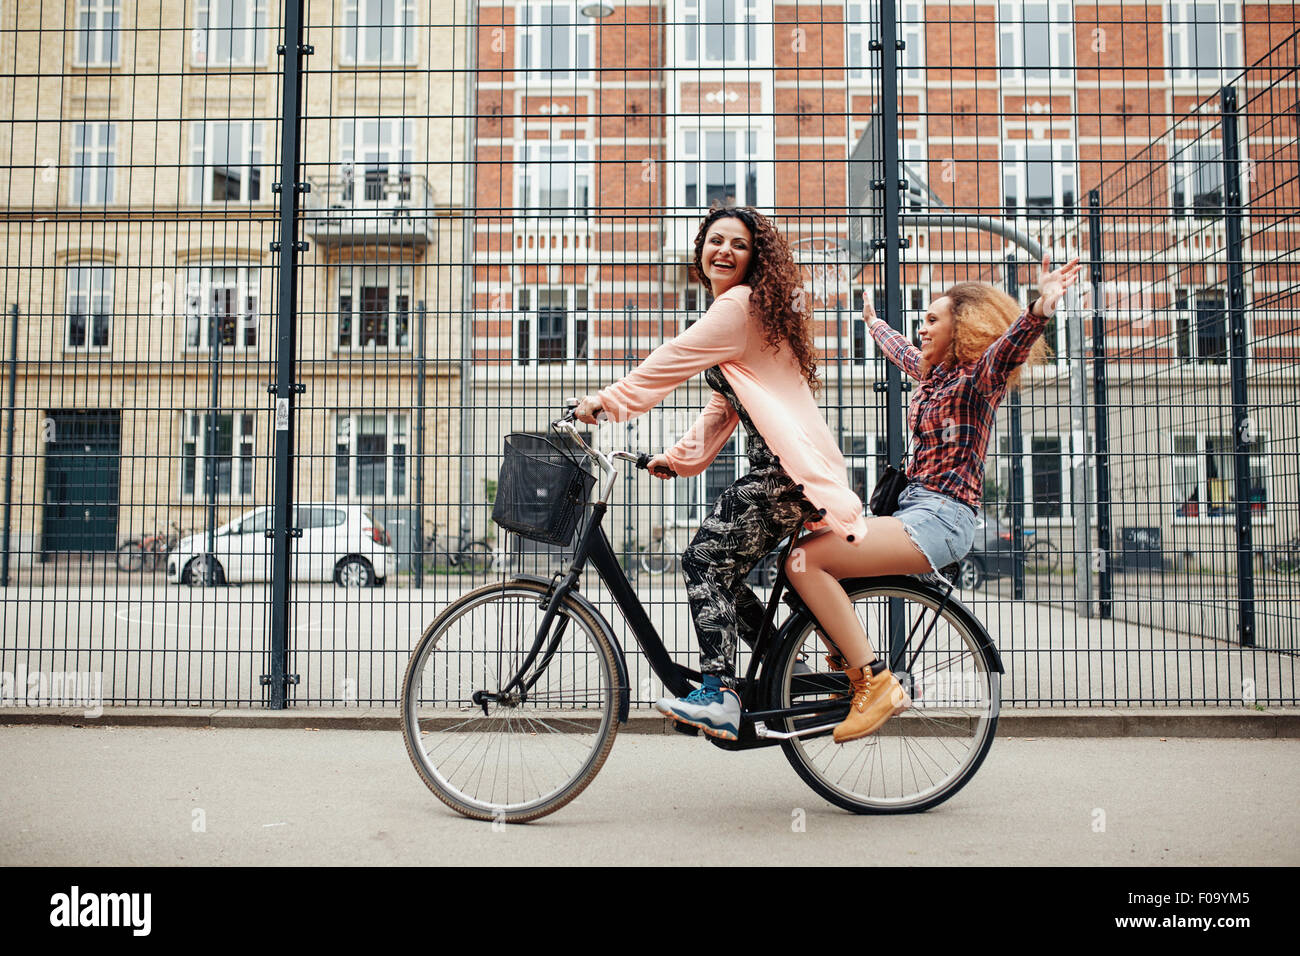 Portrait of two happy young women enjoying bike ride on city street. Female friends riding on one bicycle. Stock Photo